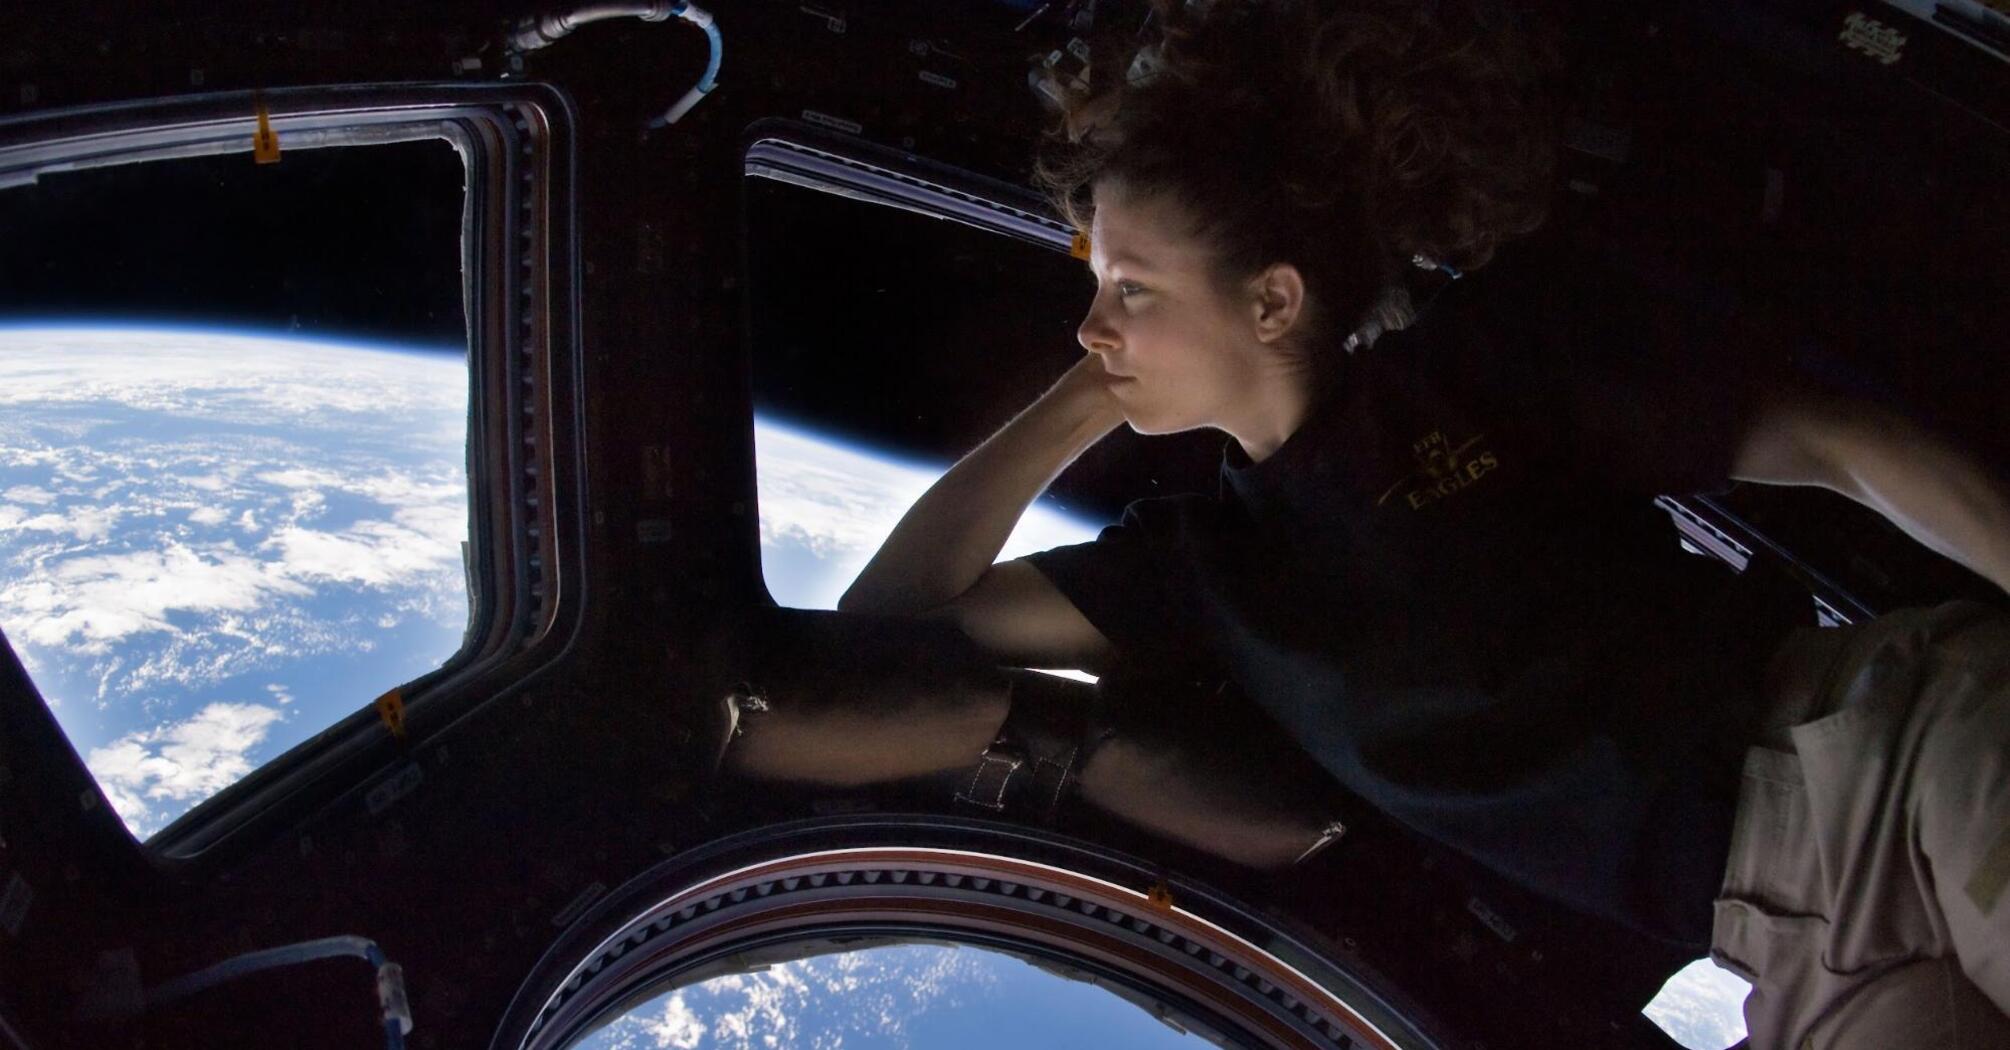 The girl looks out the window of the space porthole